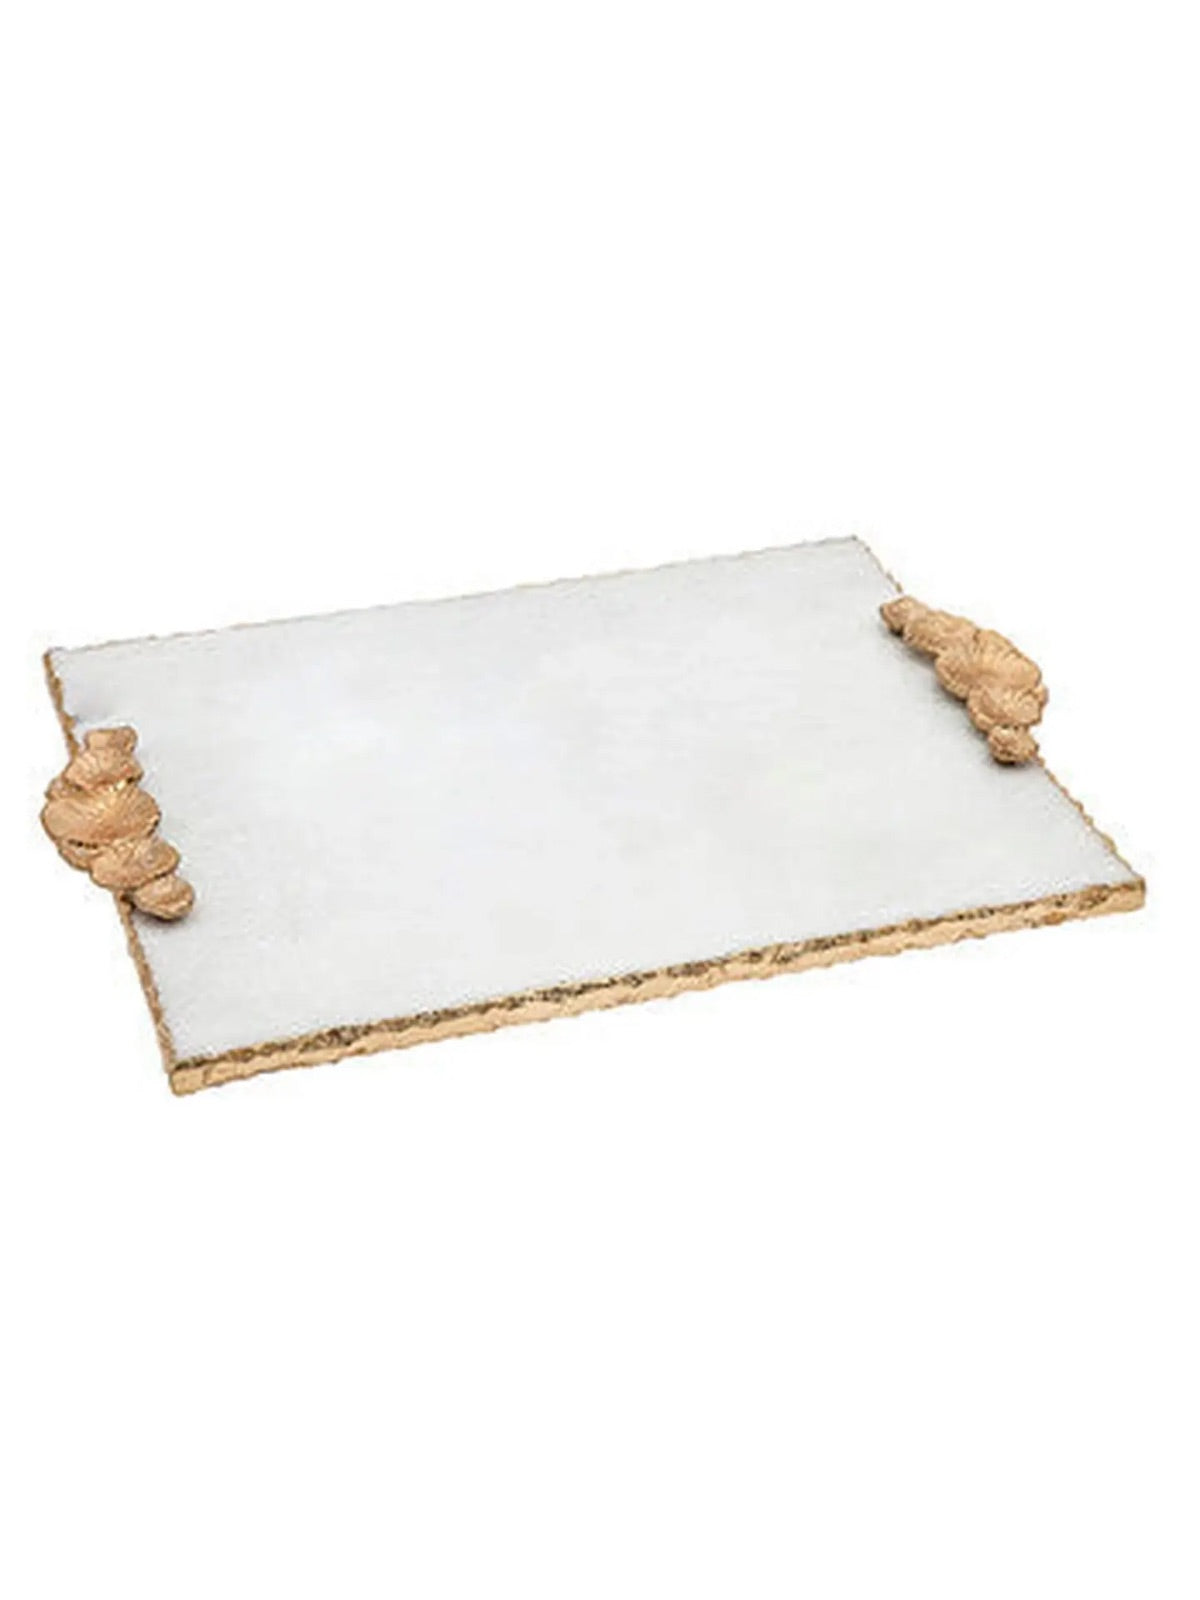 Luxury Marble Serving Board with Stainless Steel Gold Pleated Inkcap Handles measuring 16L x 12W x 1H inches.